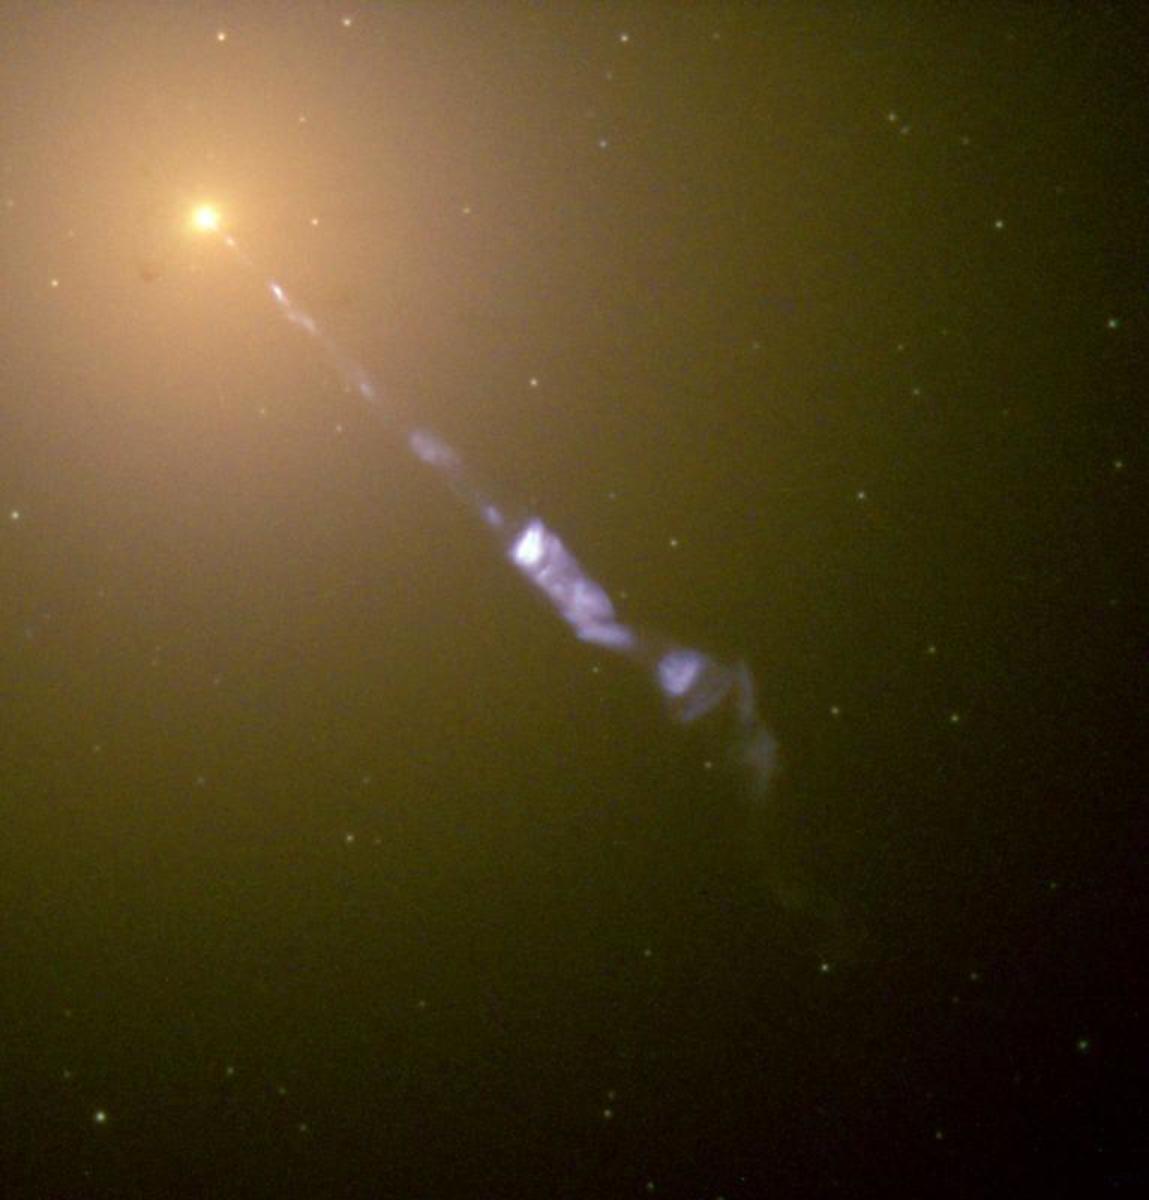 The black hole at the center of galaxy M87 emits "A black-hole-powered jet of electrons and other sub-atomic particles traveling at nearly the speed of light." 